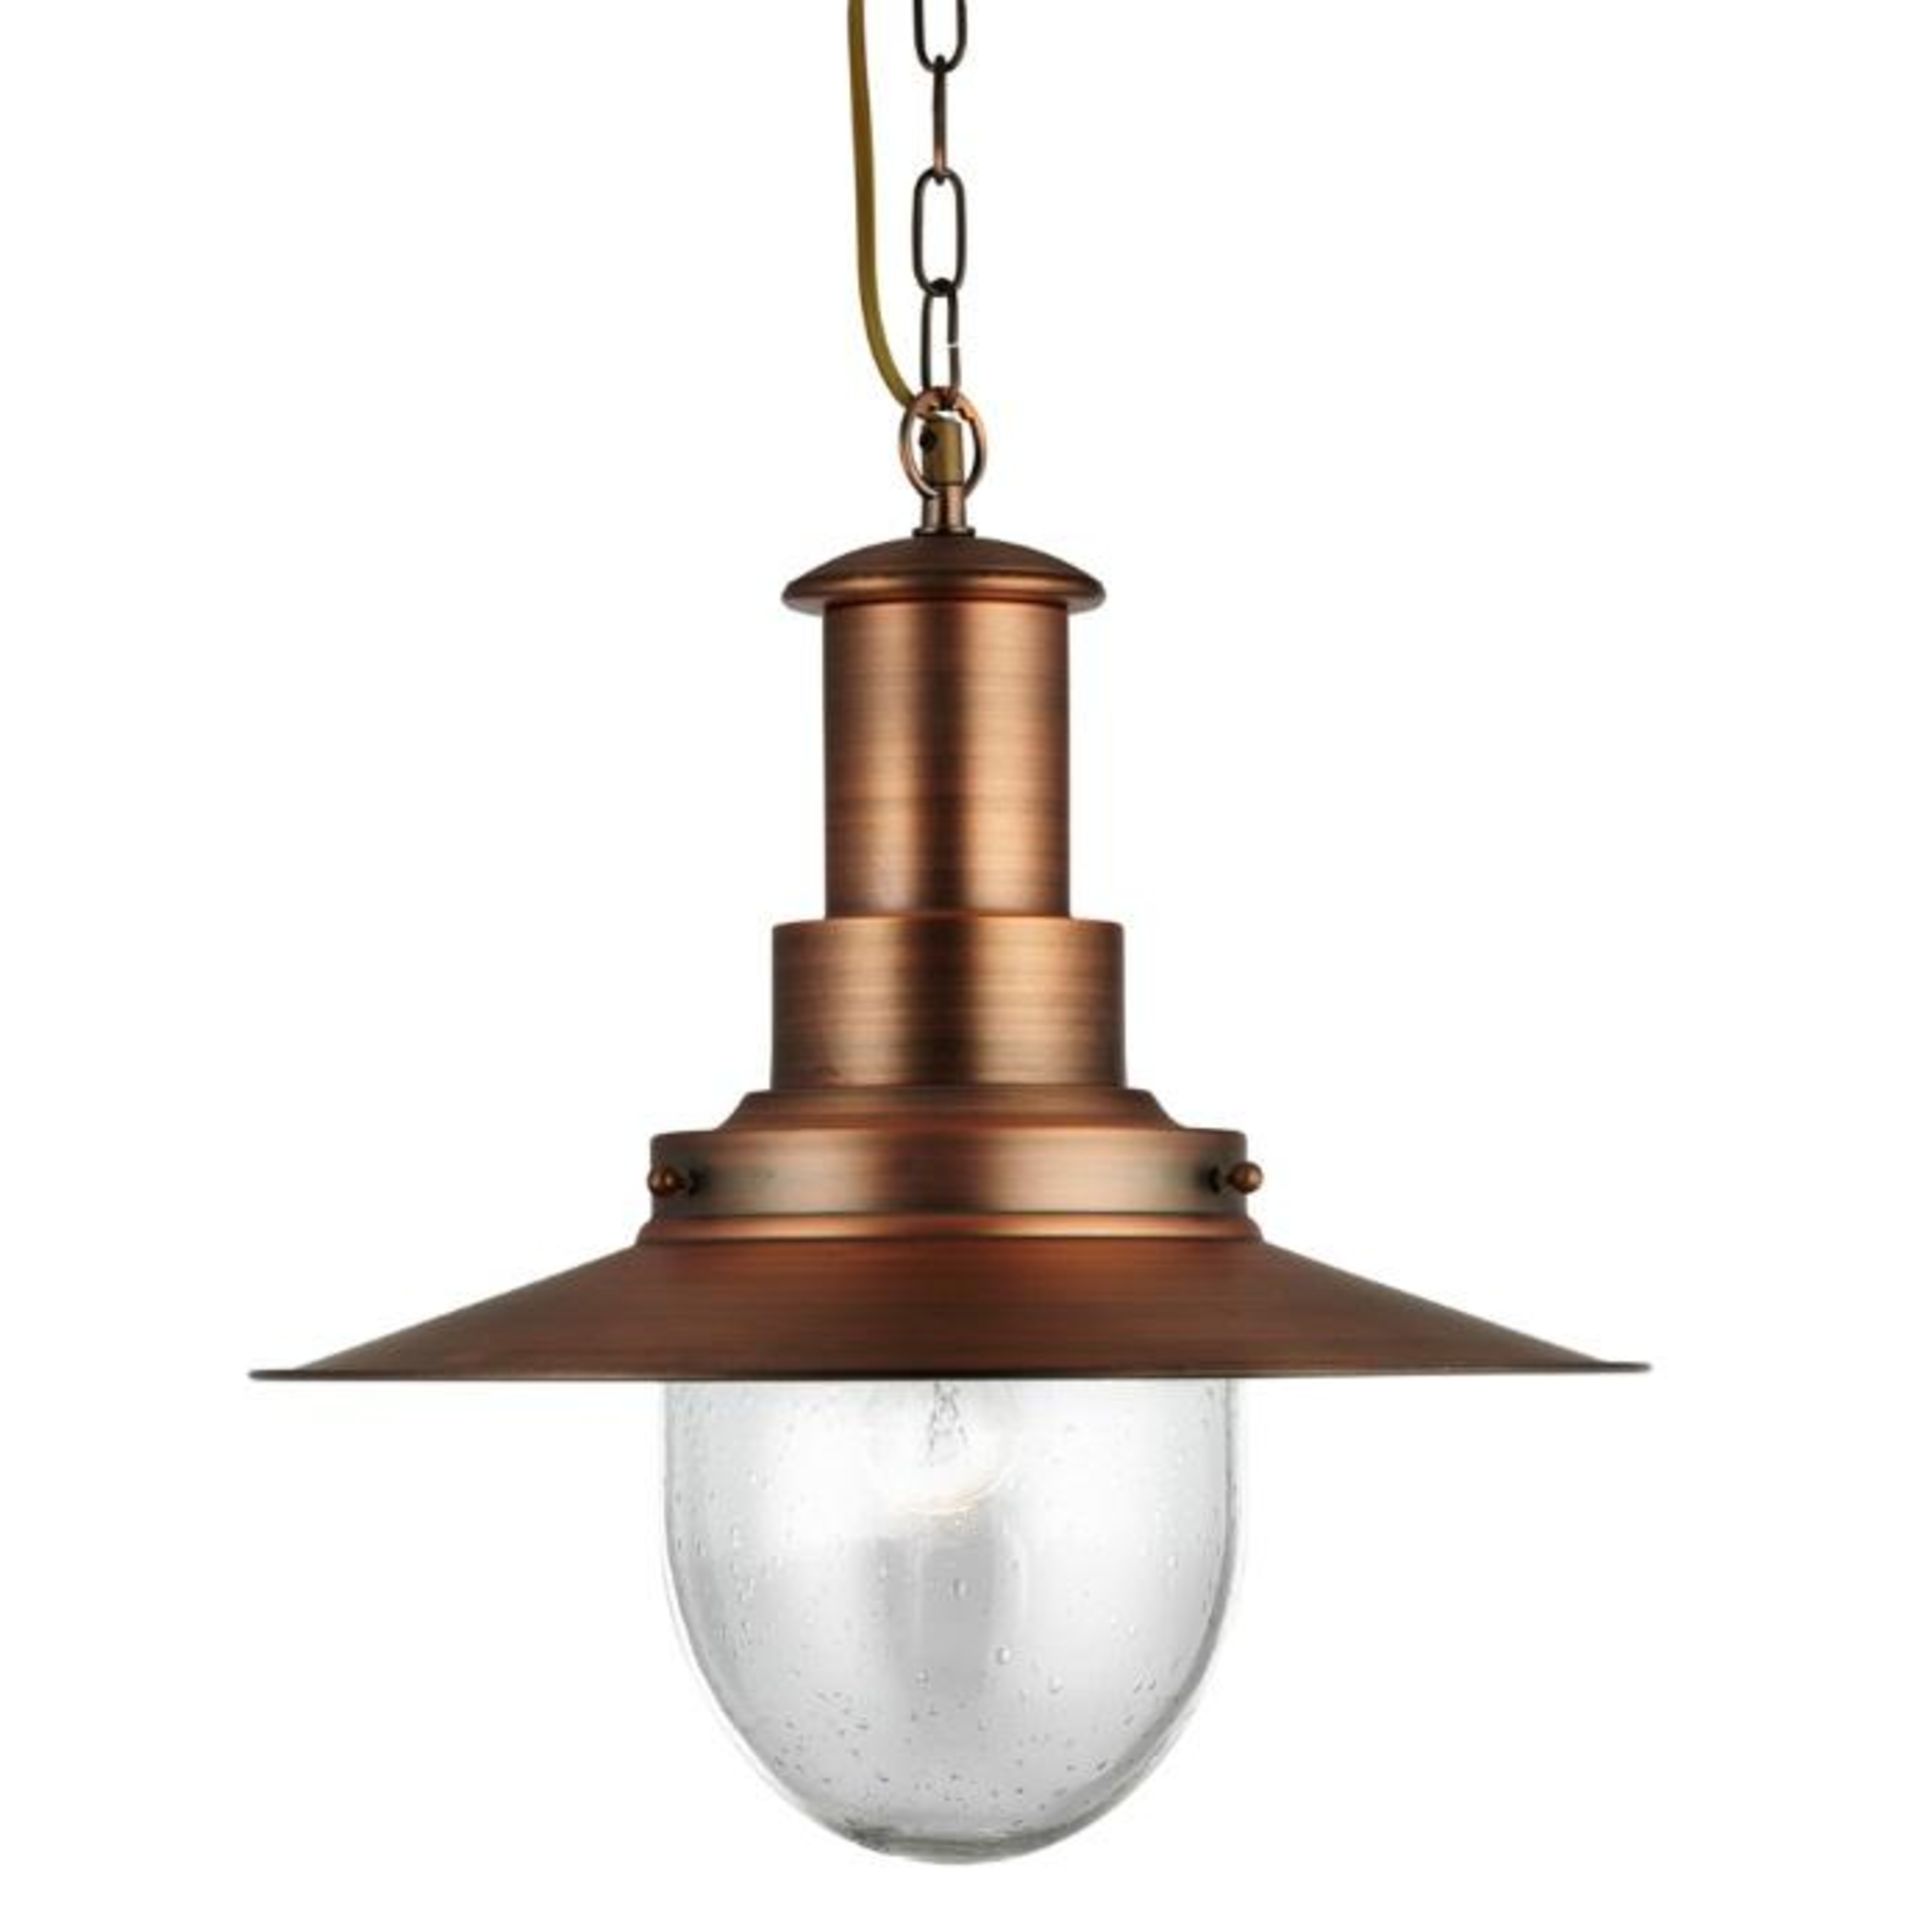 1 x Large Fisherman Copper Pendant Light With Oval Seeded Glass Shade - New Boxed Stock - CL323 - Re